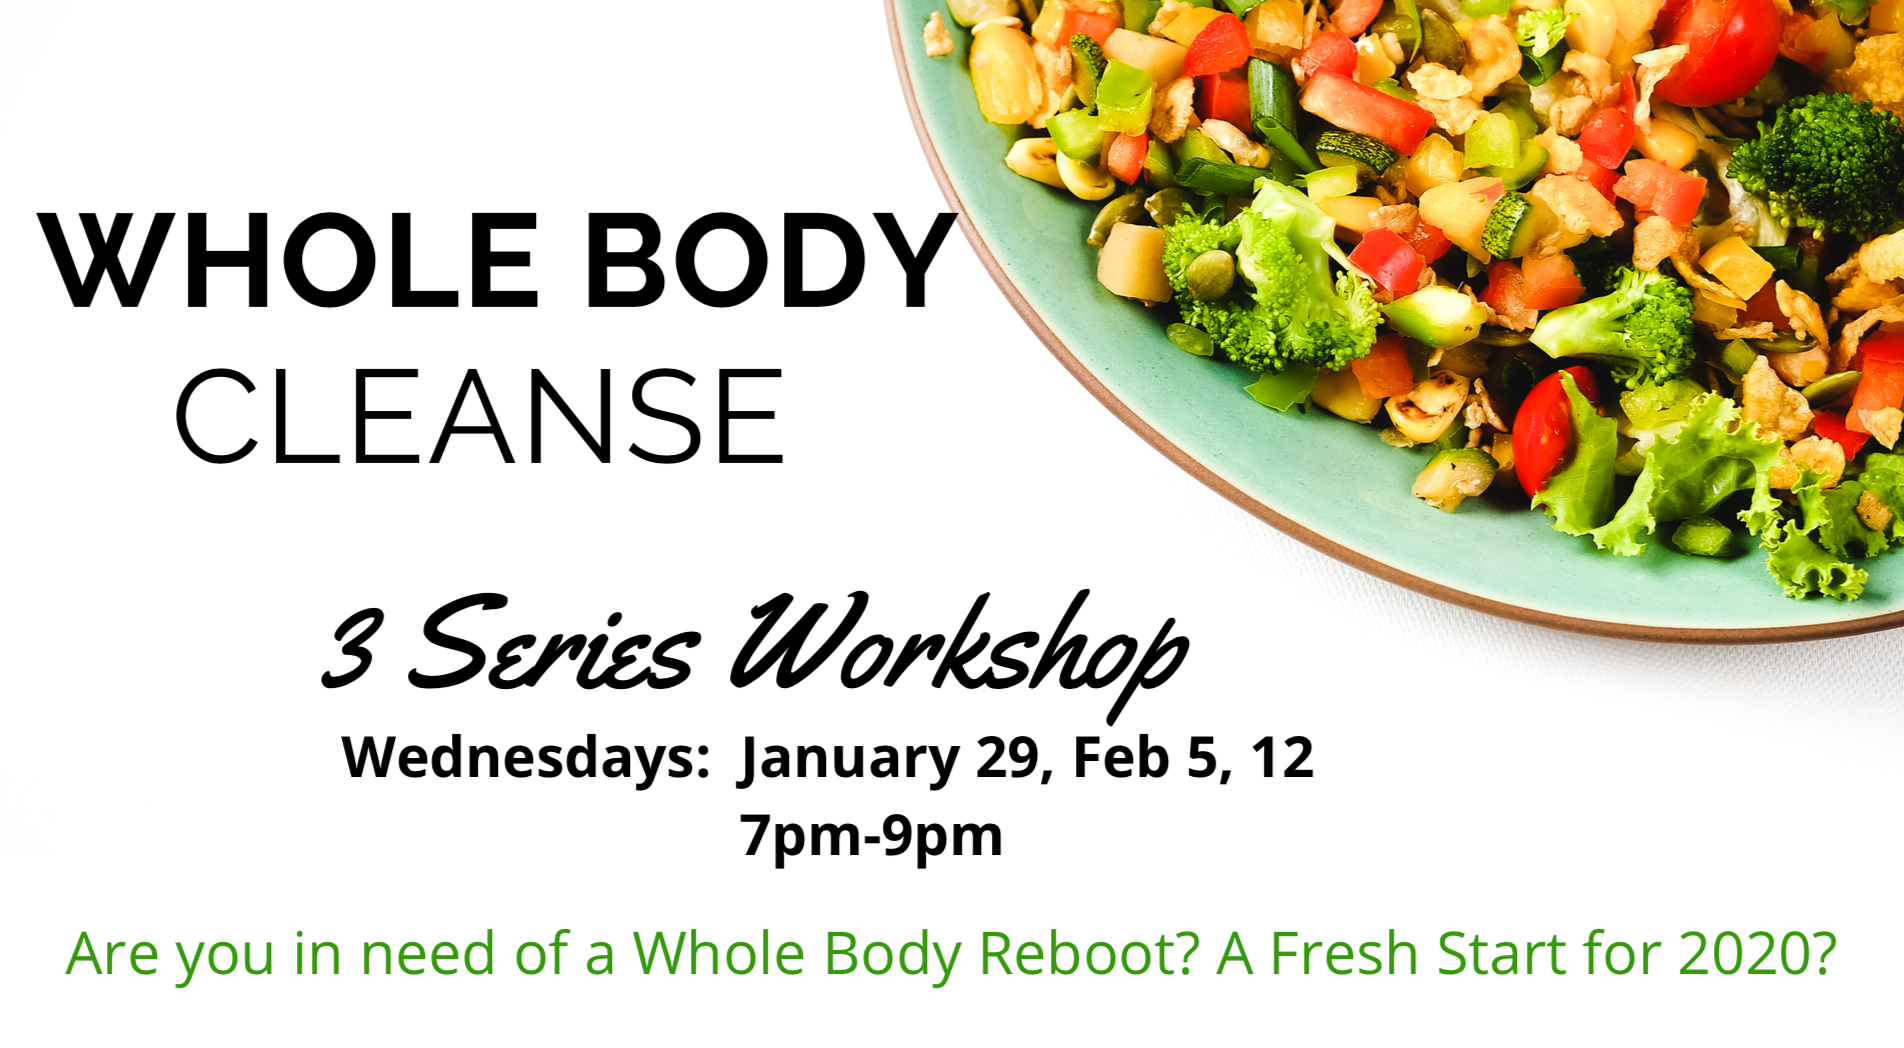 Whole Body Cleanse WorkShop at NatCan Integrative Medical & Wellness Centre in Vaughan Ontario